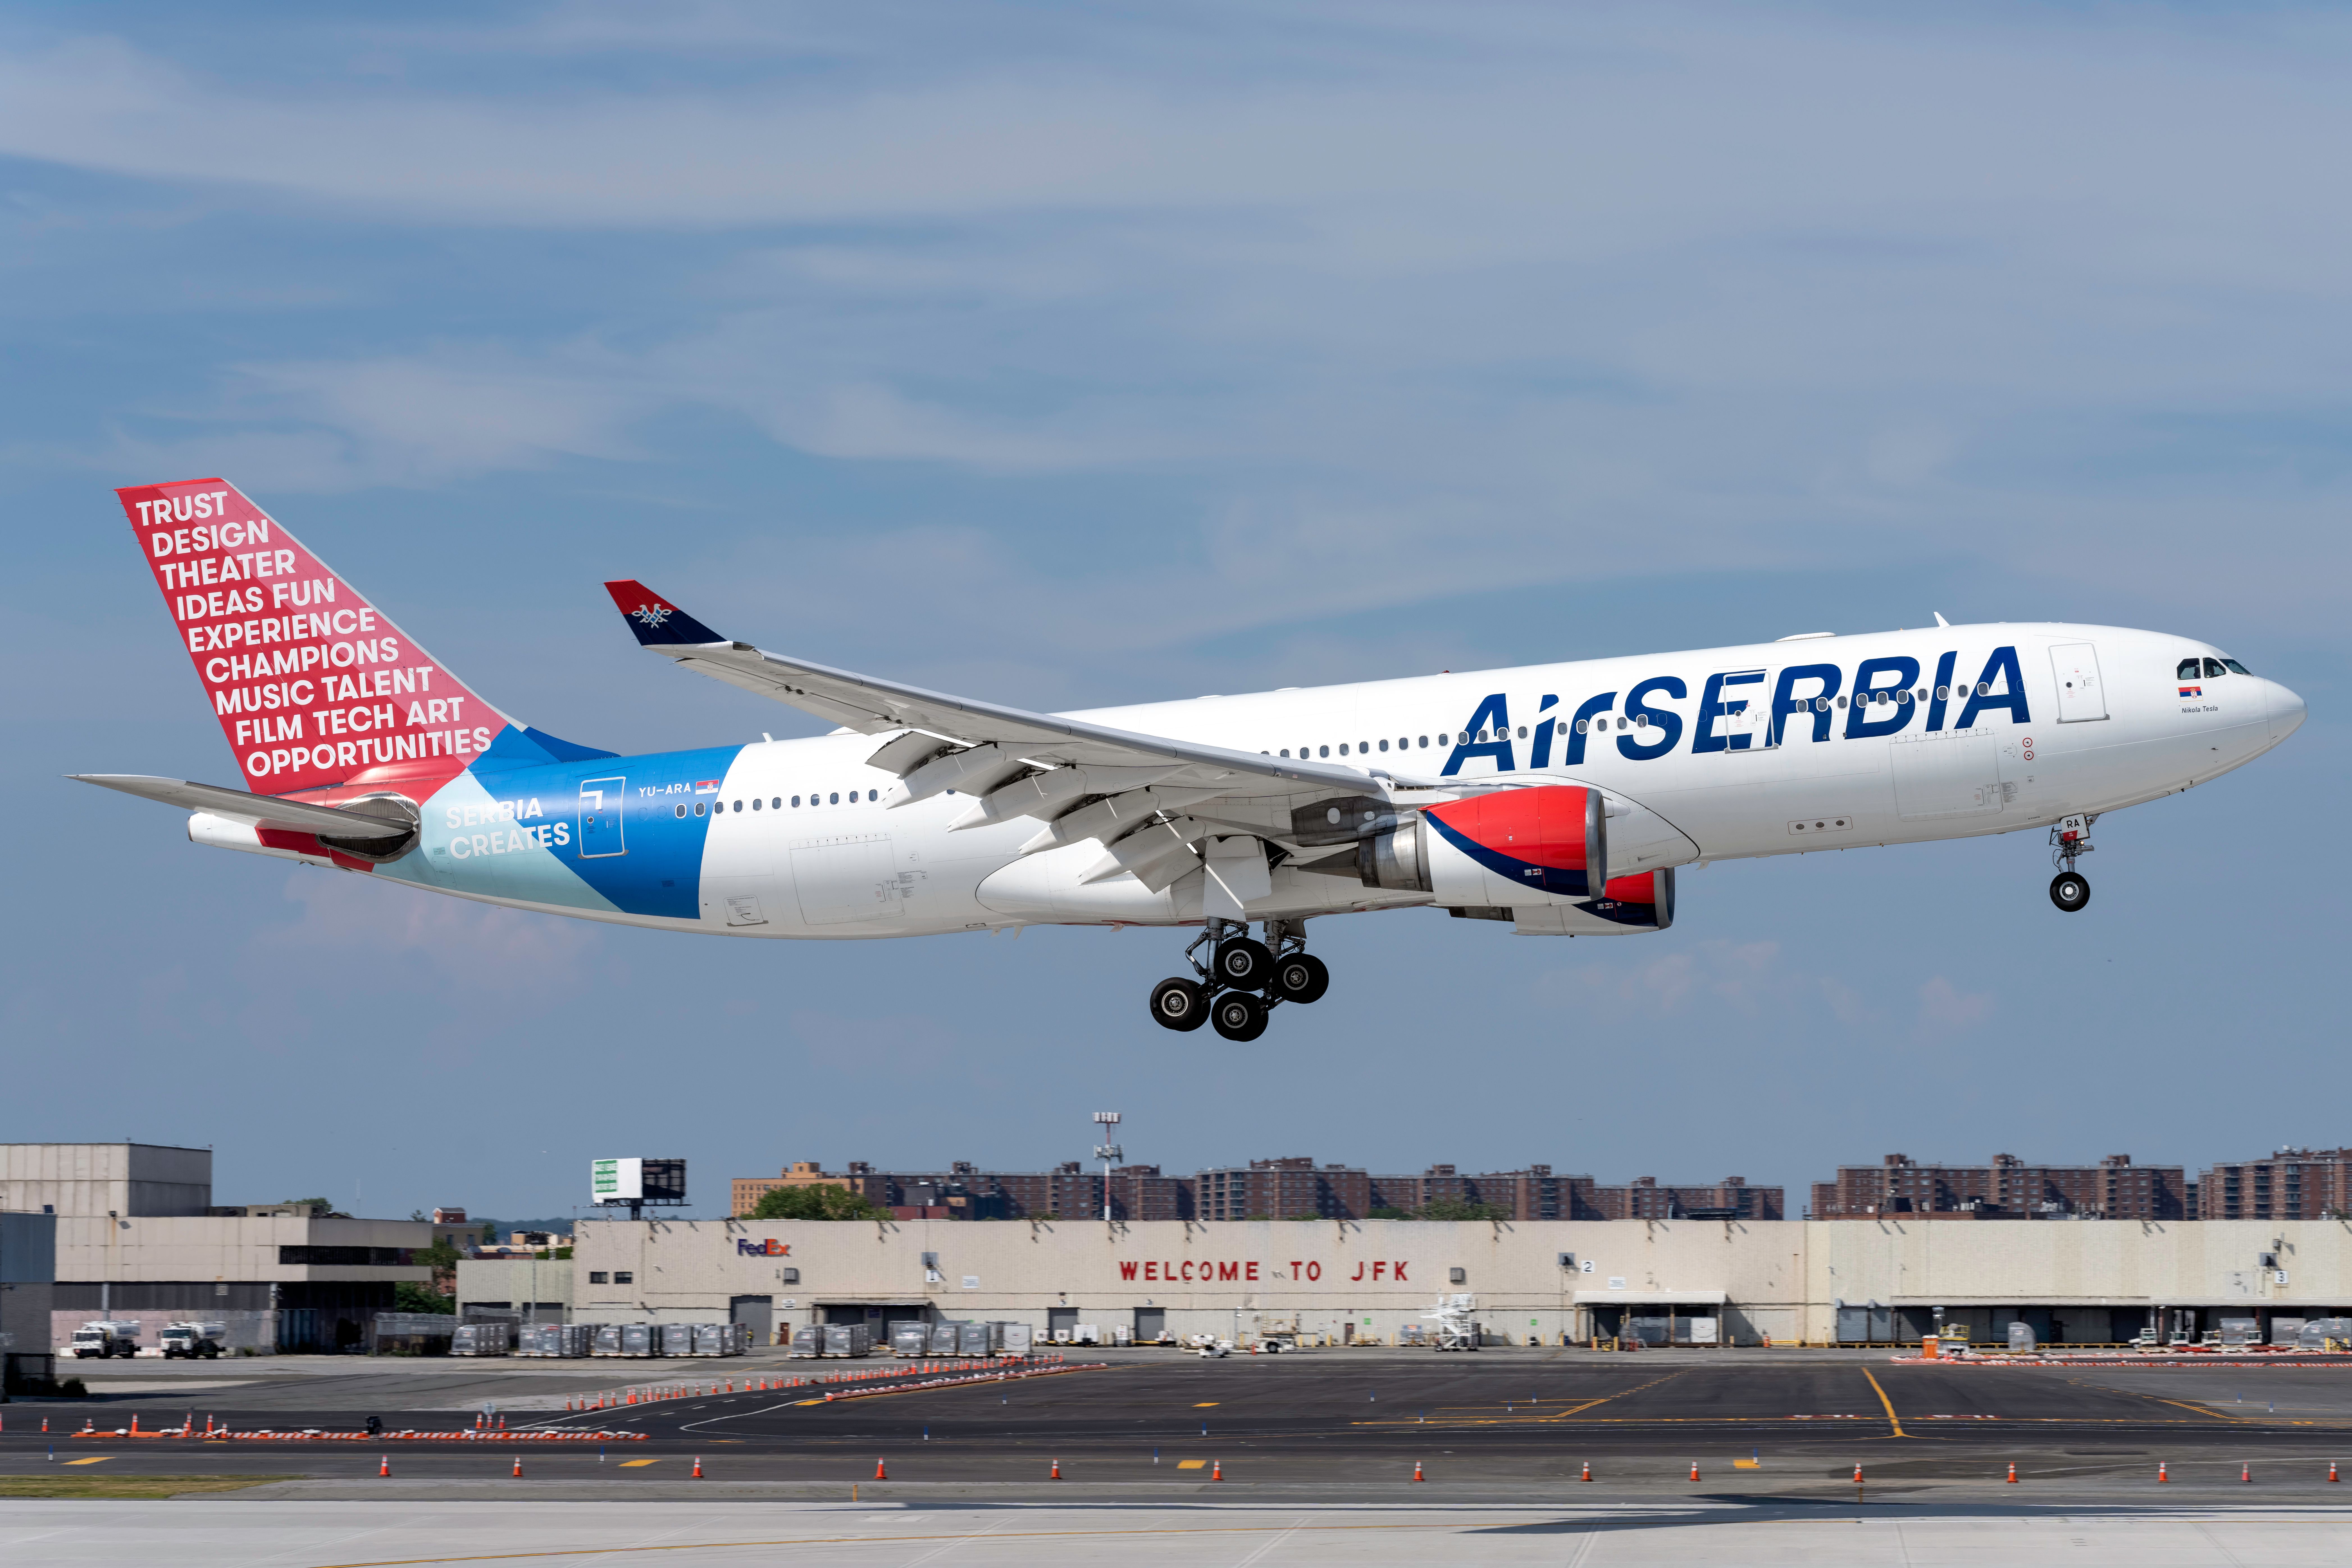 An Air Serbia Airbus A330-200 about to land At New York JFK Airport.